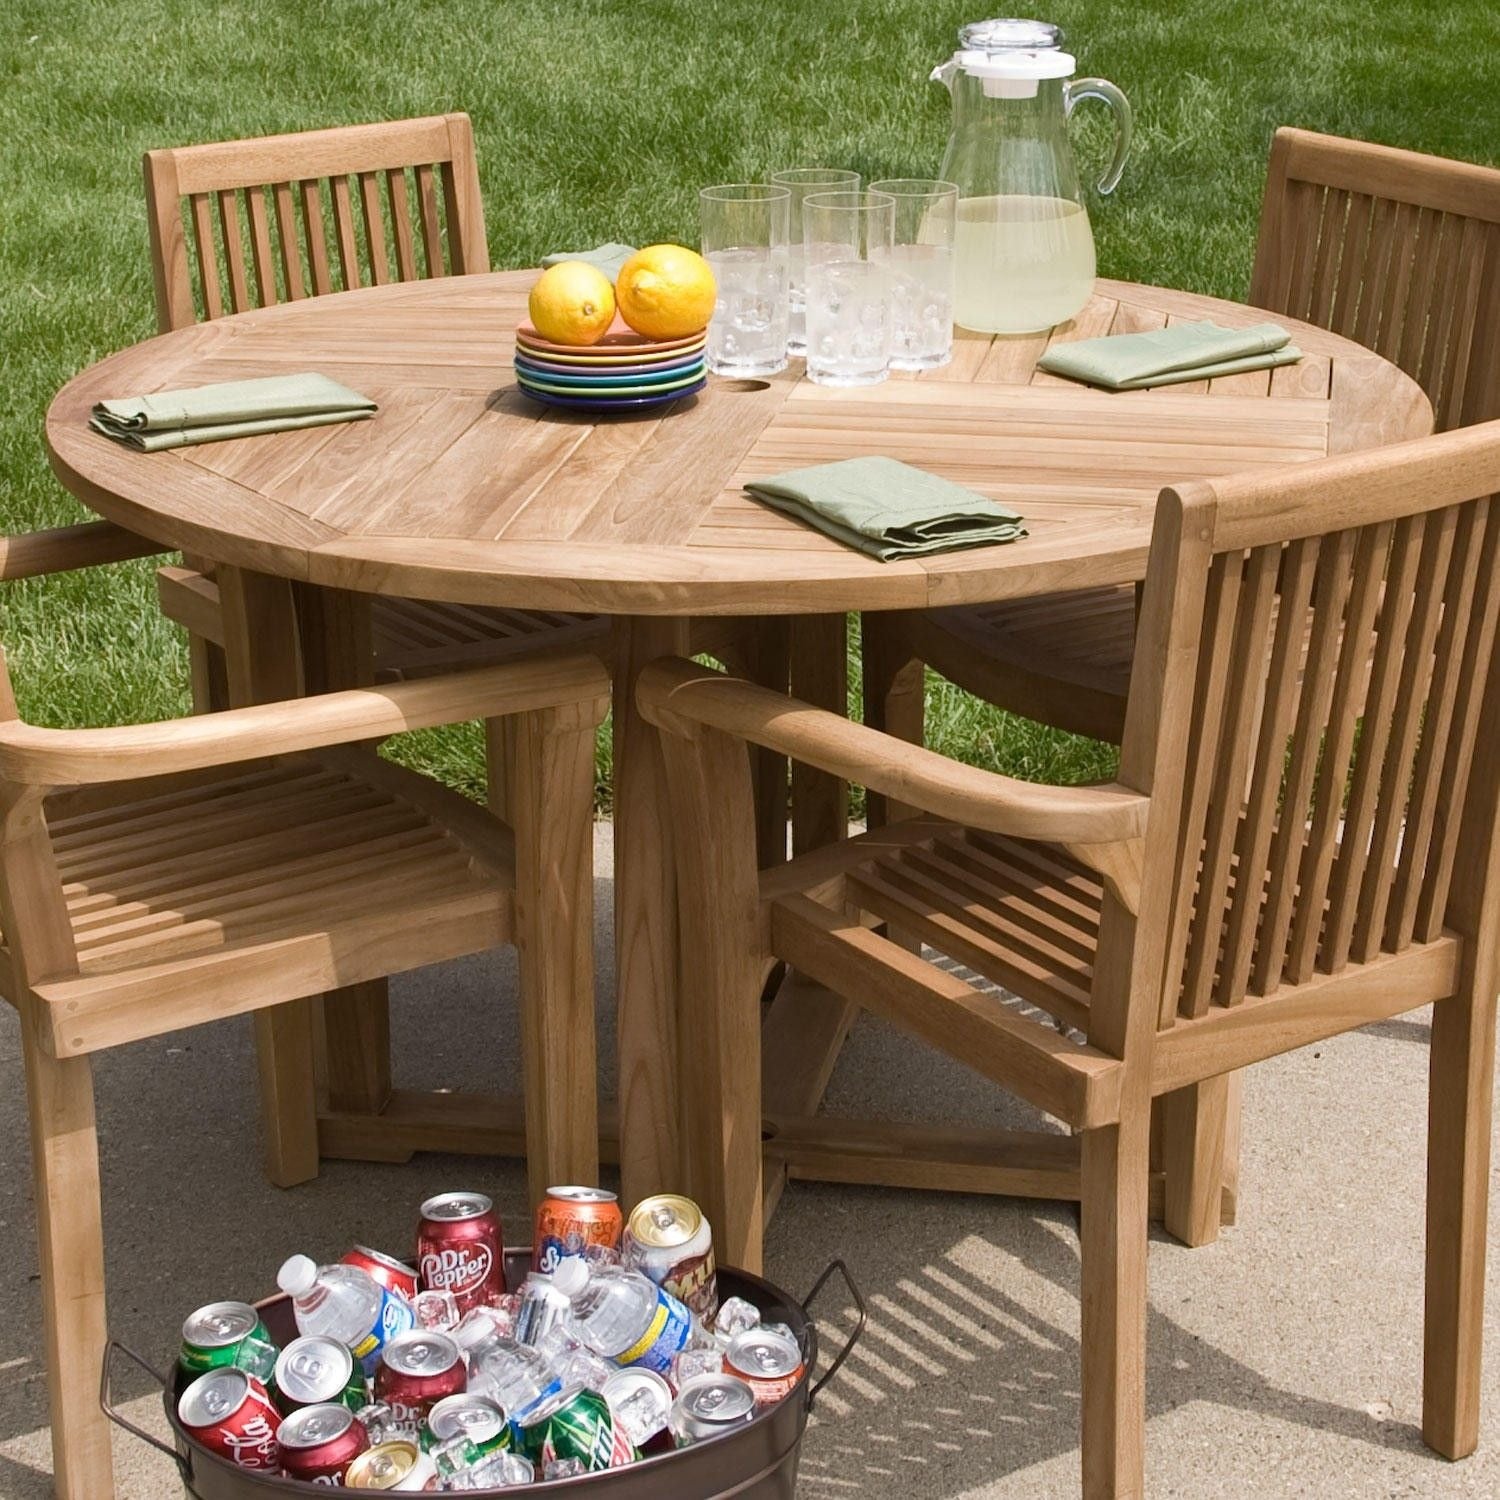 Is Eucalyptus Wood Good For Outdoor Furniture